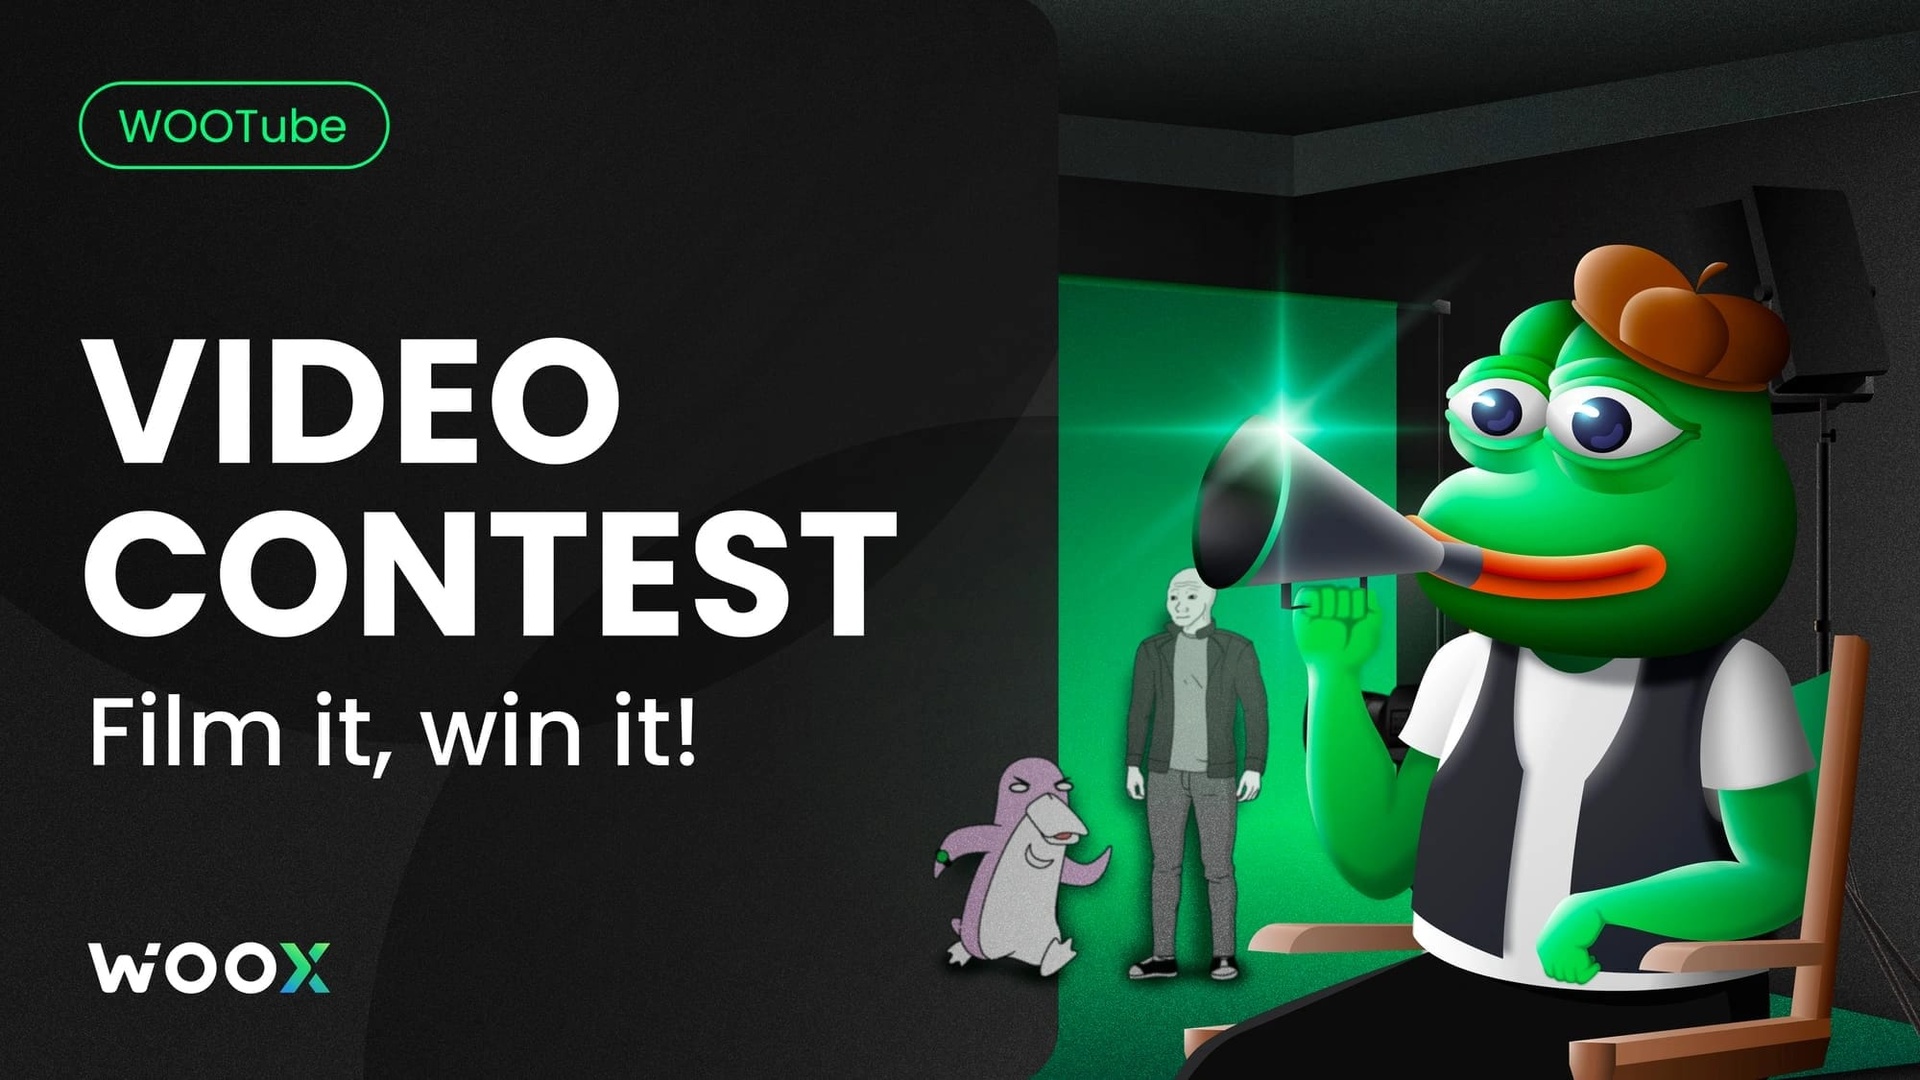 WOOTube Video Contest Winners Announced